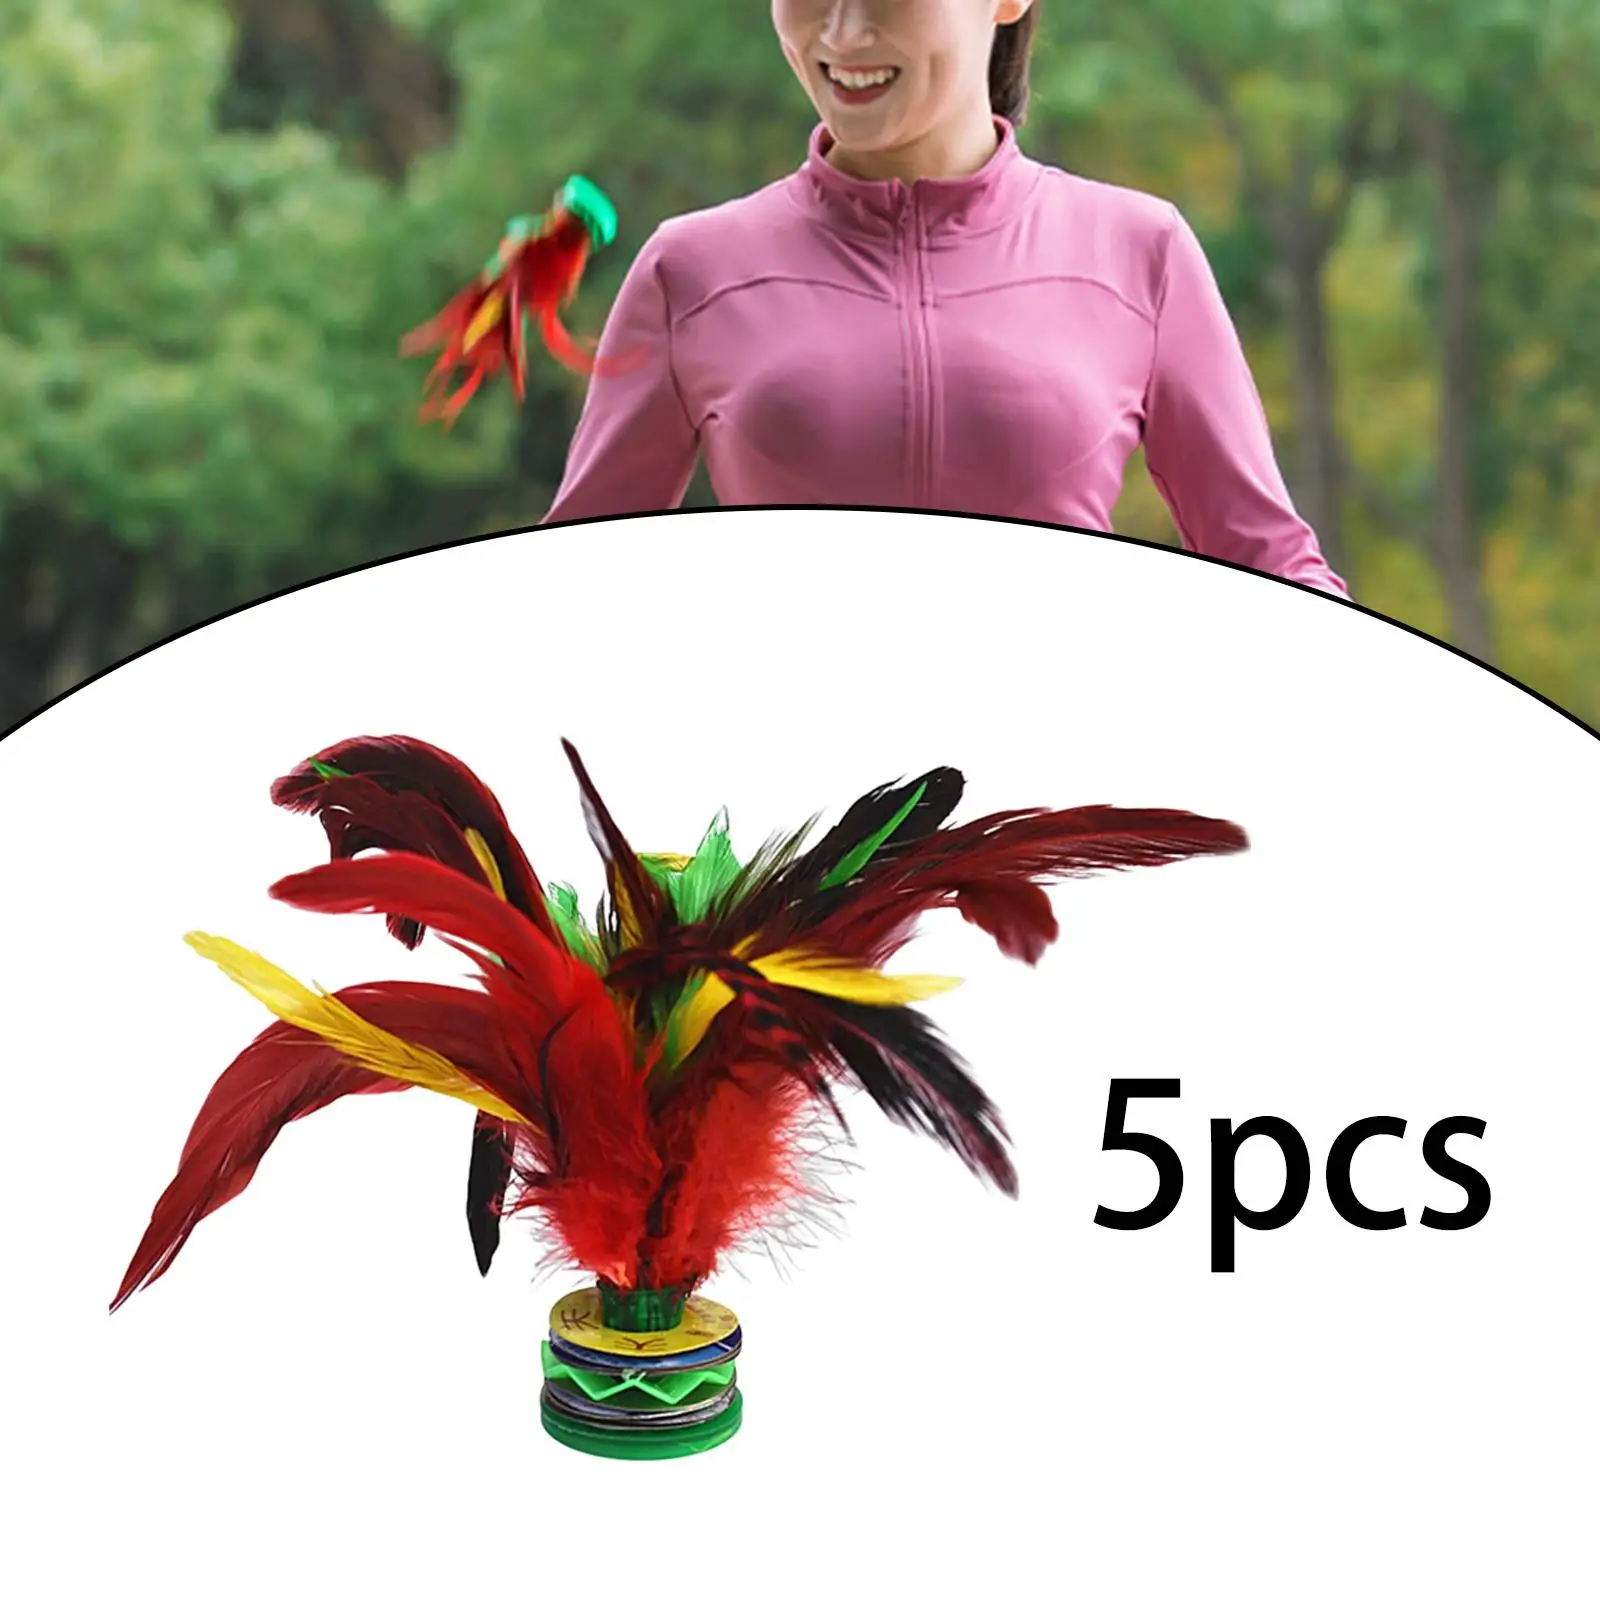 5 Pieces Colorful Shuttlecock Exercise Traditional Chinese Jianzi Sports Toy Kicking Shuttlecocks Sports Toy